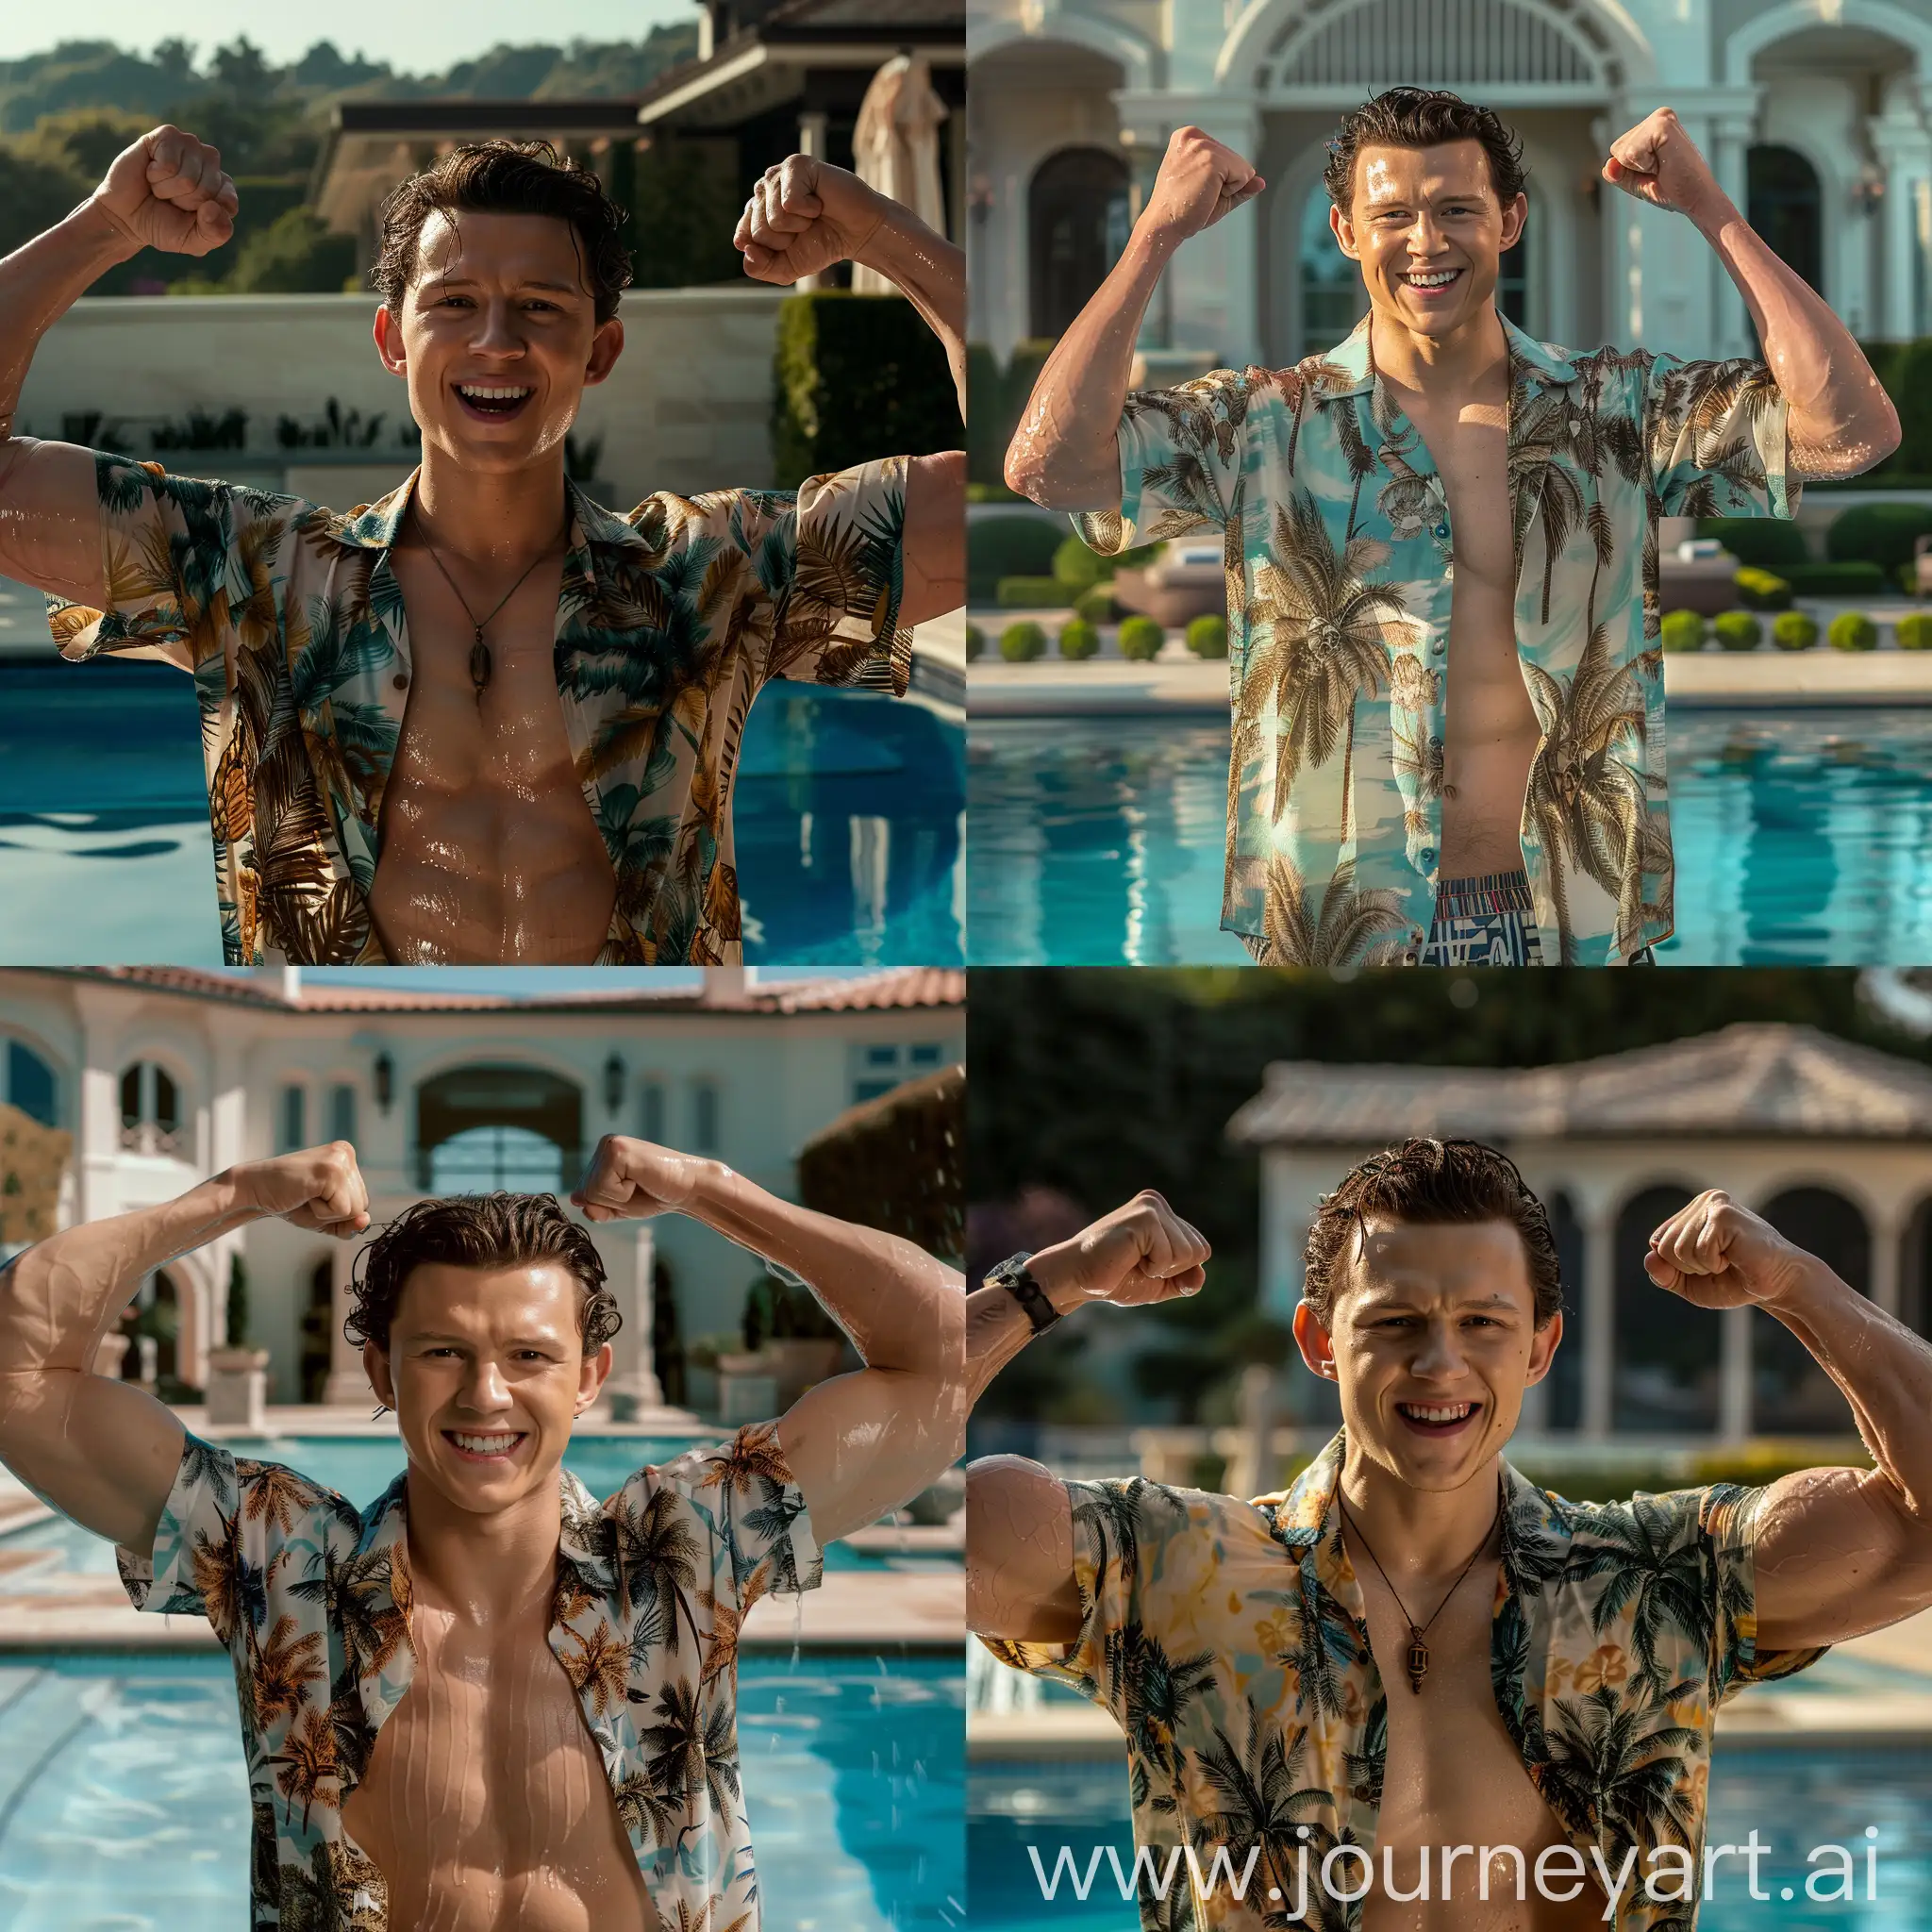 Movie lighting, actor Tom Holland's handsome face, a handsome and fit man wearing an open Hawaiian shirt, clean and smooth skin, fit male torso and abdomen, flexing both arms, fit biceps, handsome Tom Holland smiling, beautiful daytime lighting, sweaty and shiny skin, wet and sweaty hair, low angle, swimming pool with blurred background, huge background of a chic mansion